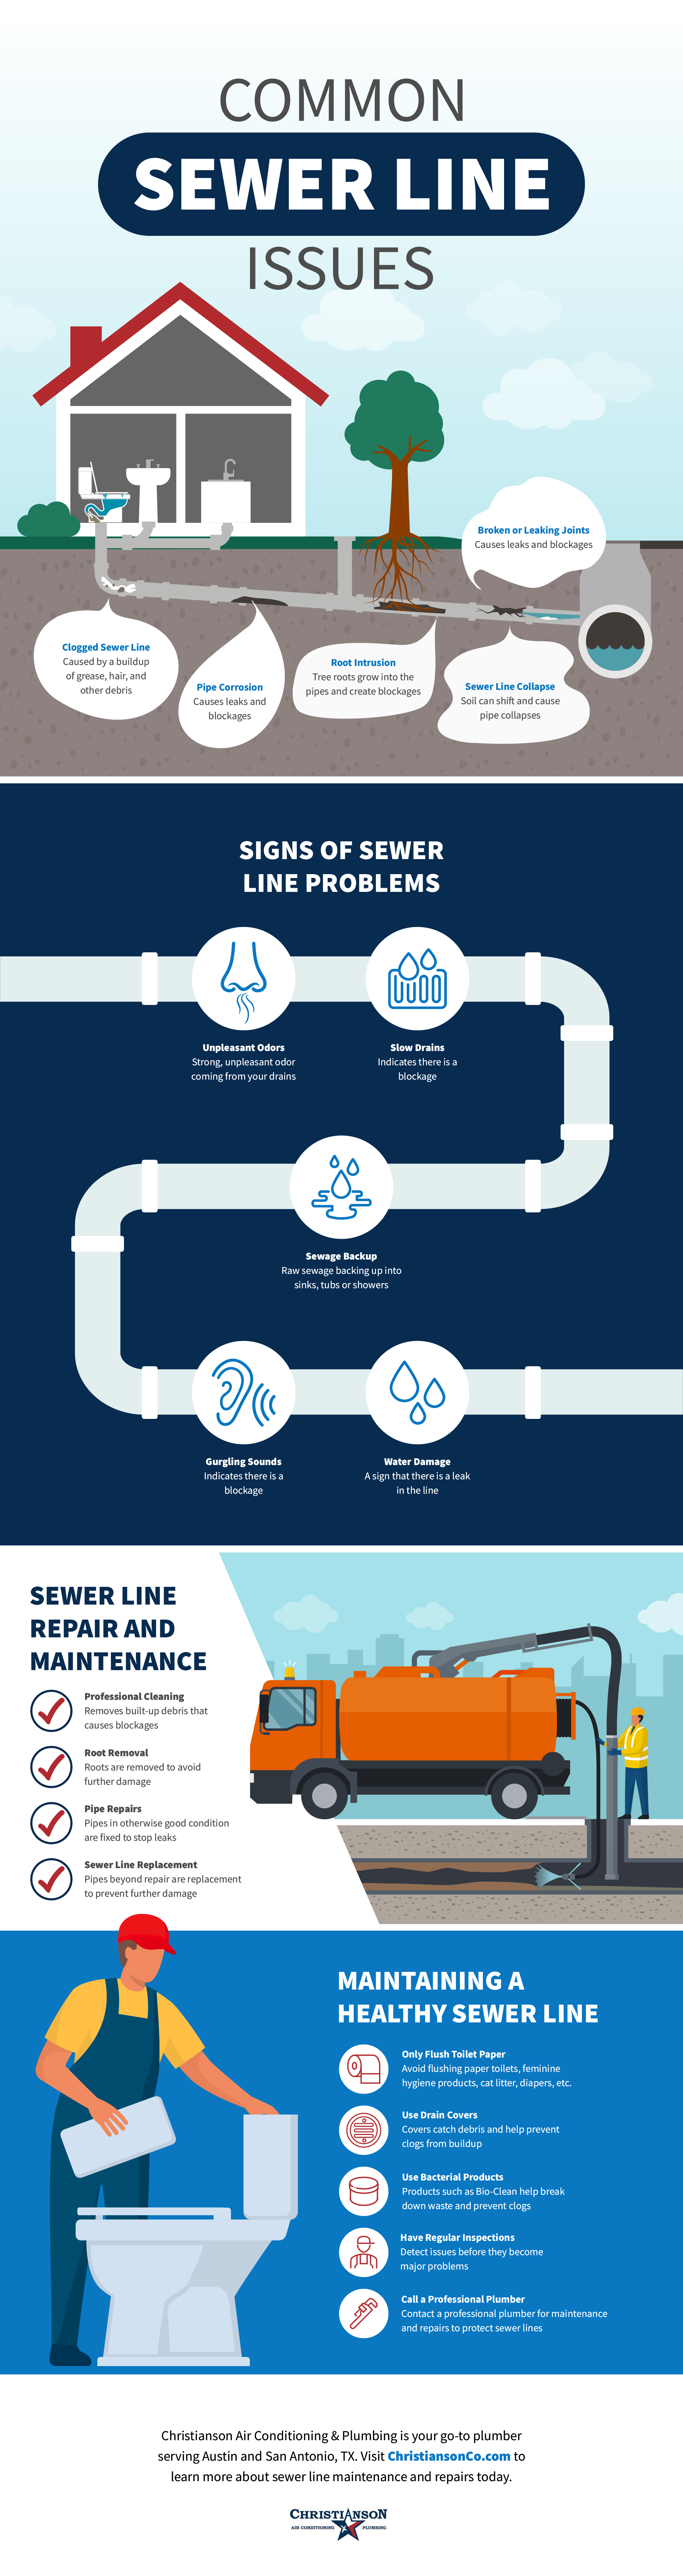 Common Sewer Line Issues Infographic